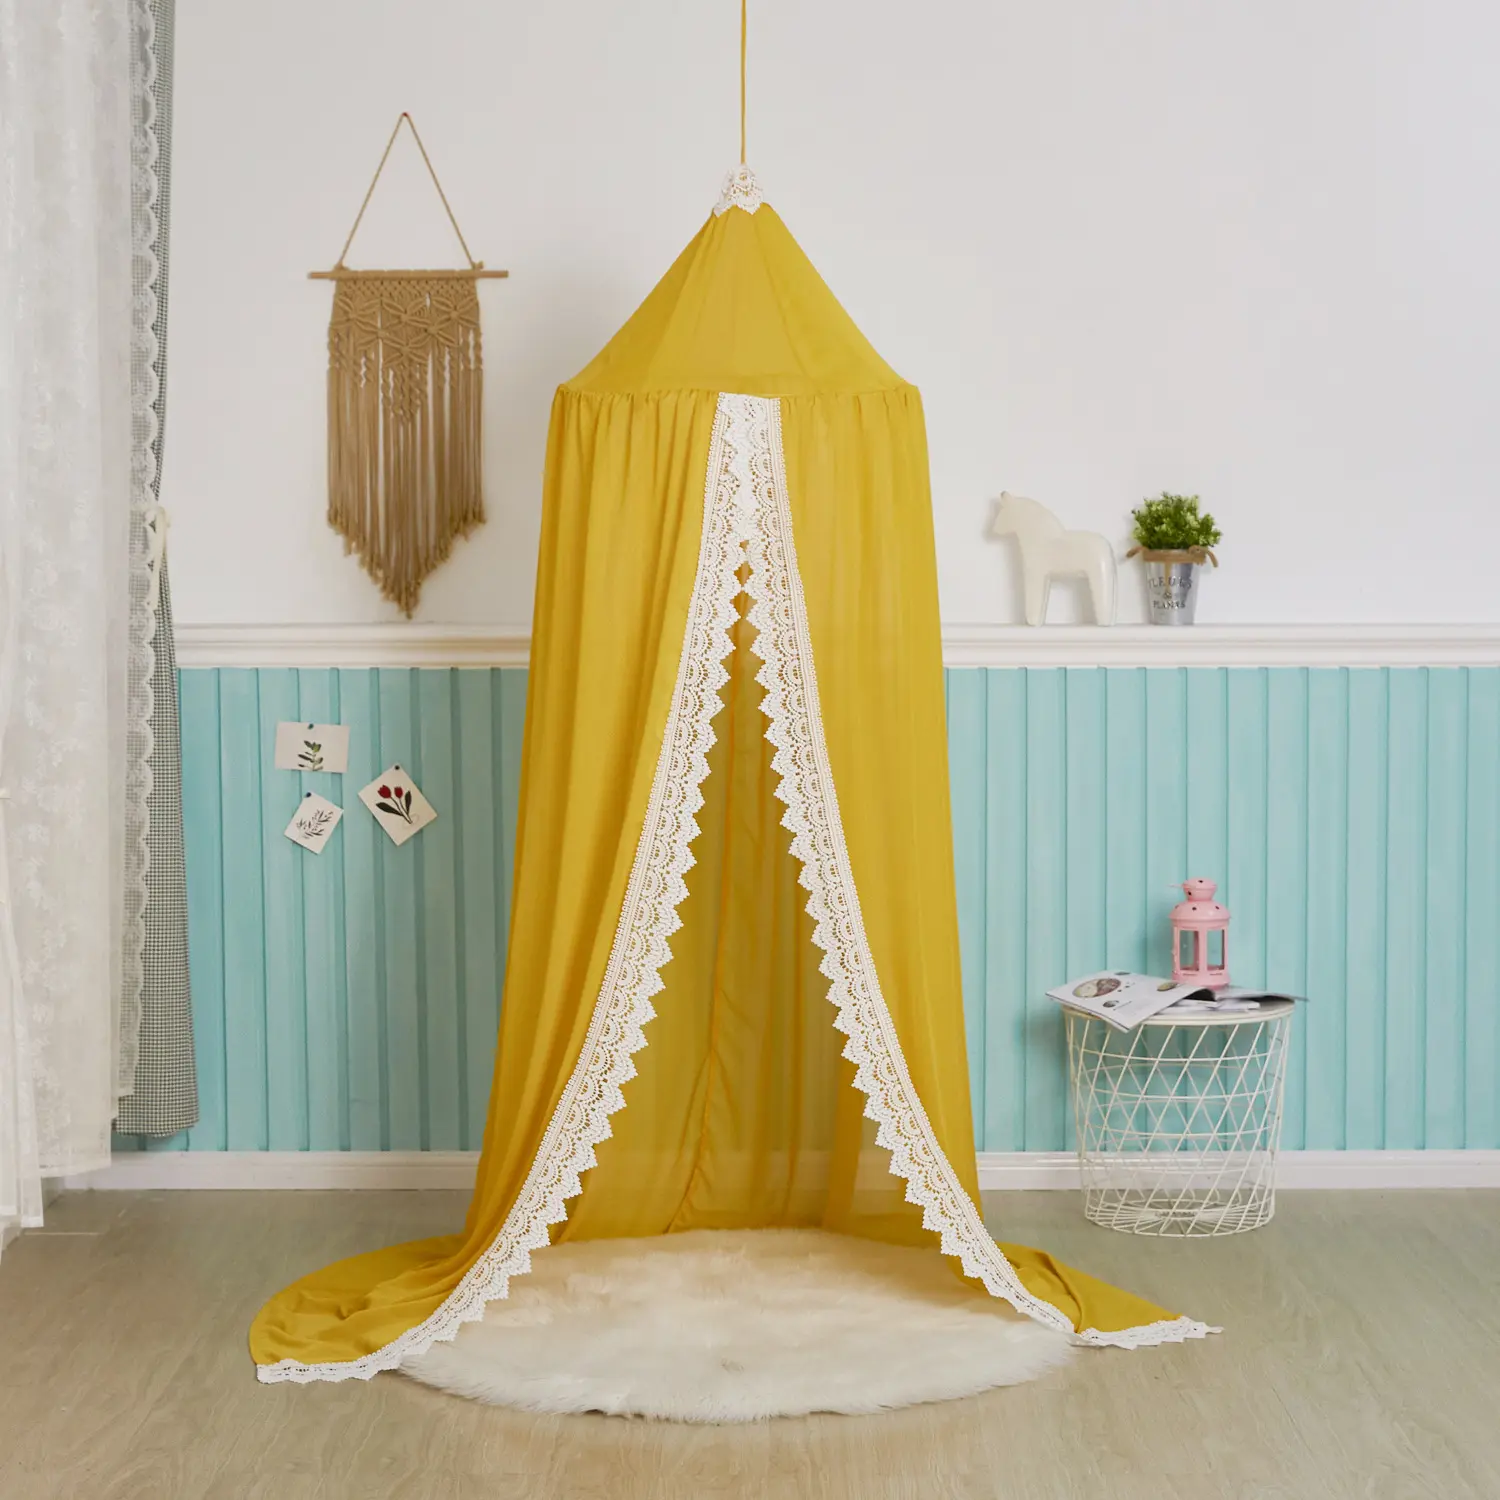 Nordic Lace Chiffon Baby Crib Tent Canopy Dome Mosquito Net Crown Baby Bed Canopy